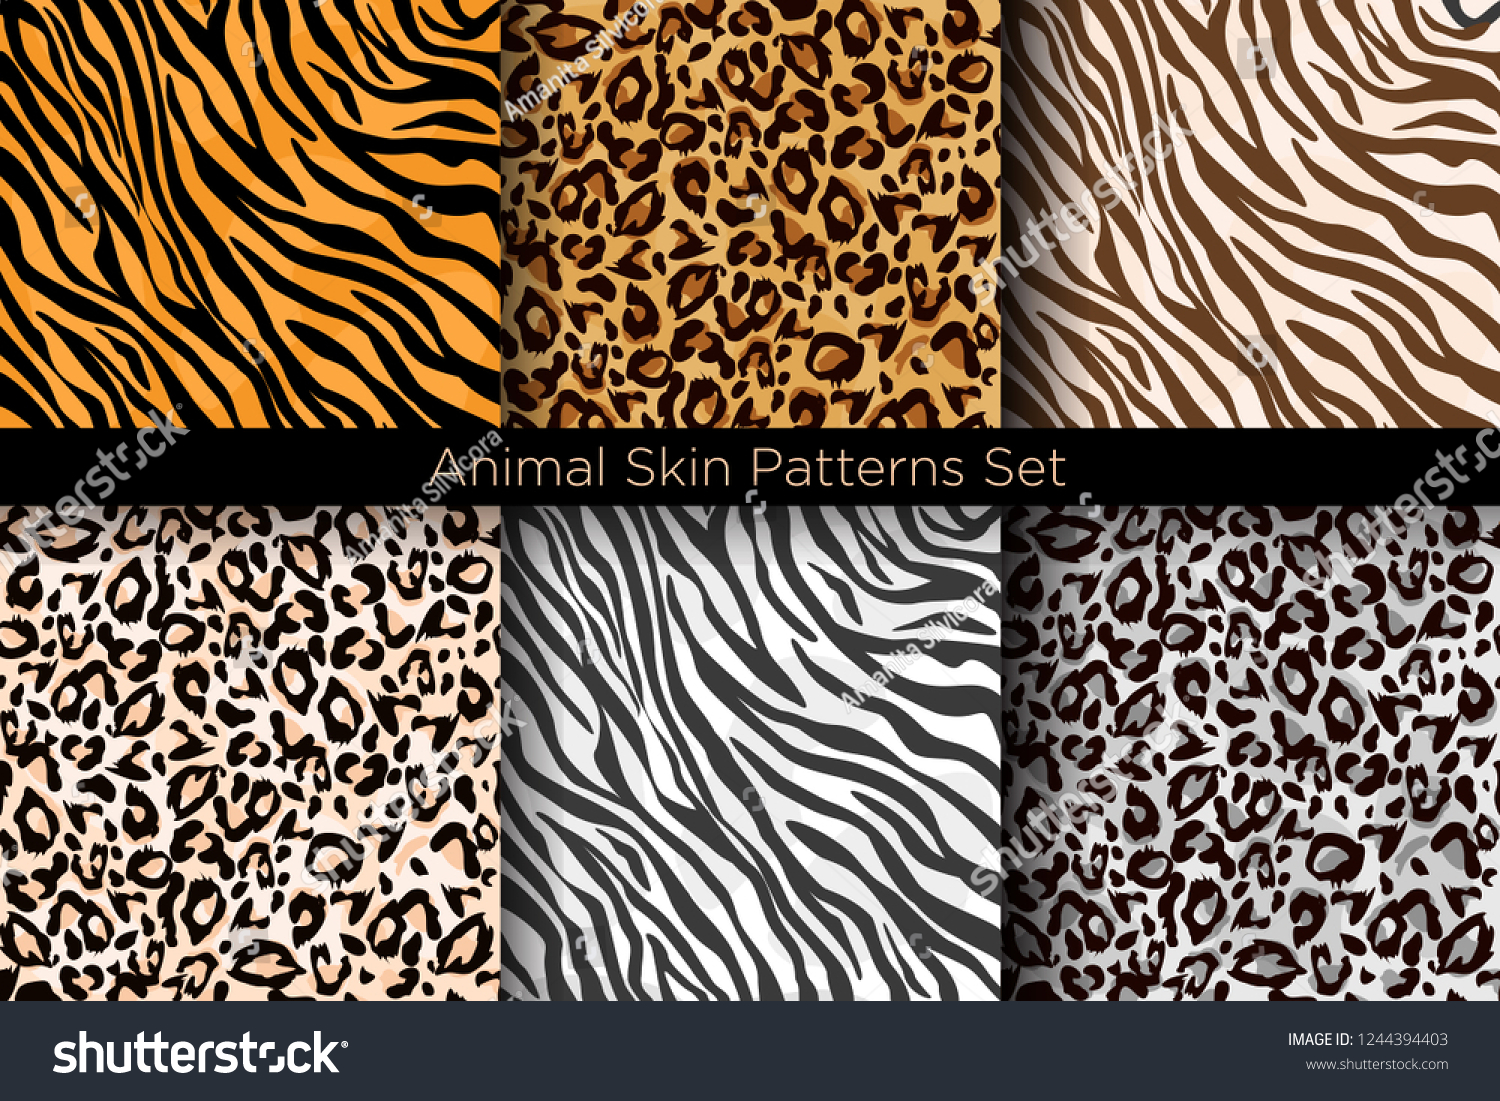 Vector illustration set of animal seamless prints. Tiger and leopard patterns collection in different colors in flat style. #1244394403